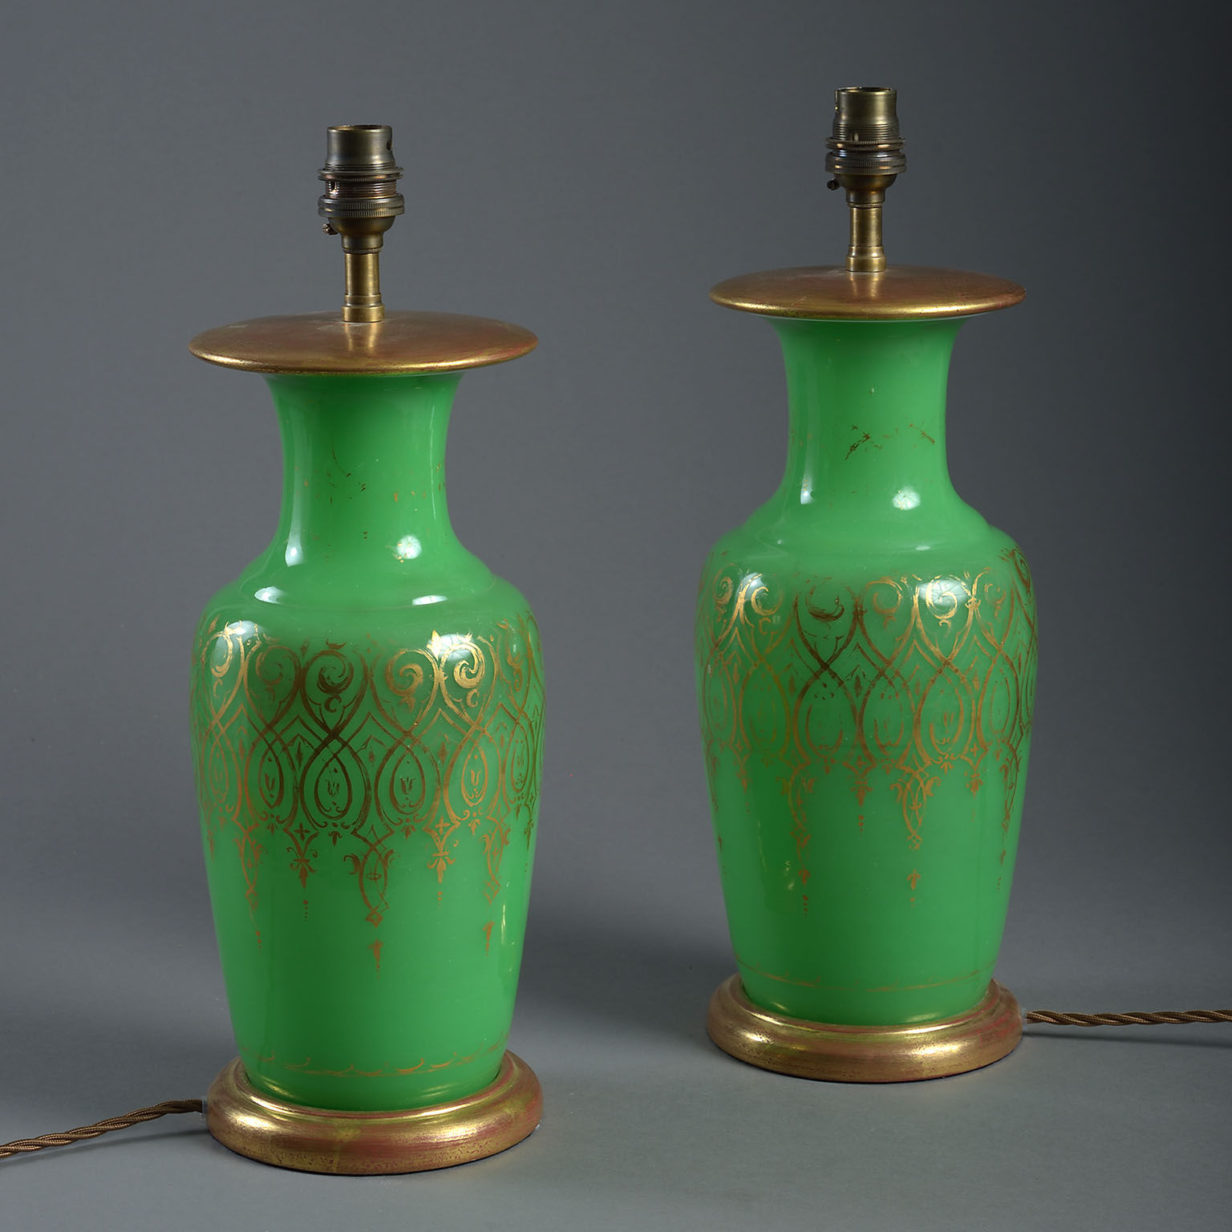 Pair of 19th century green opaline glass vase lamps